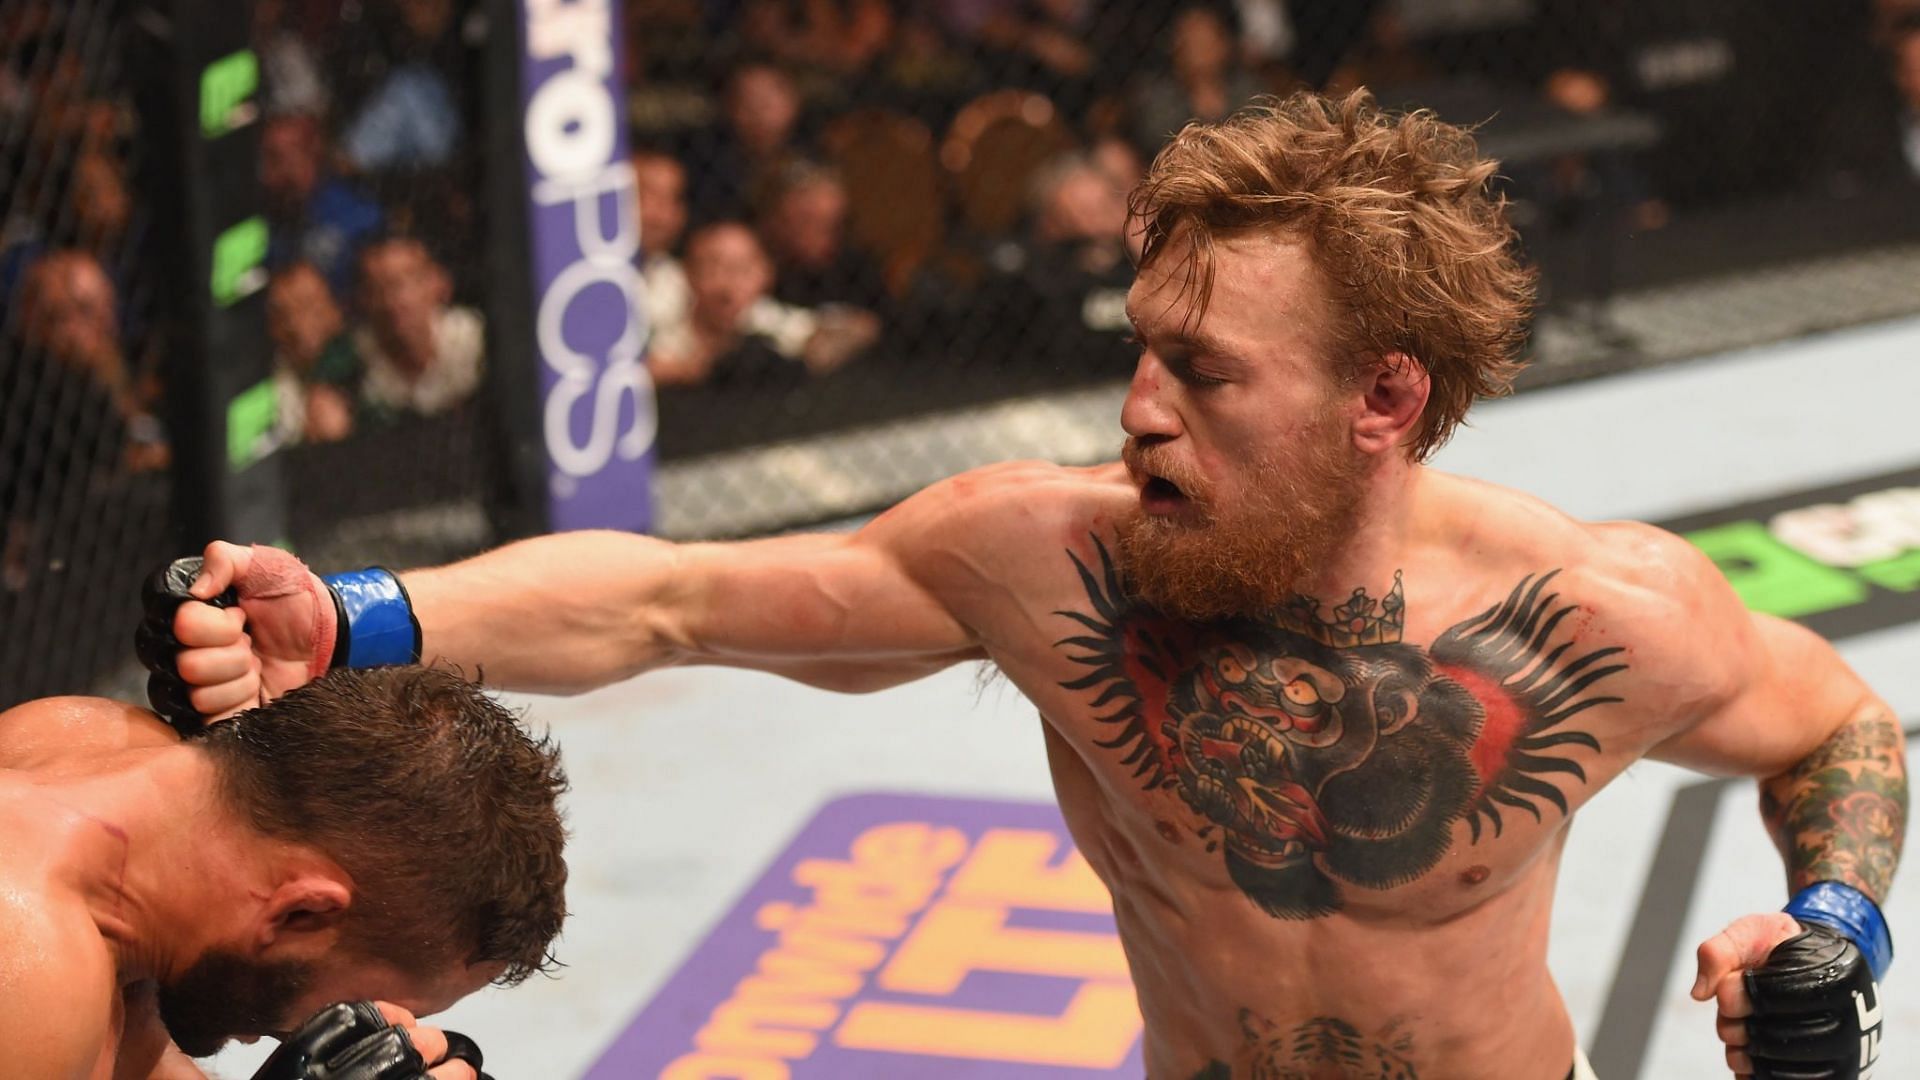 Conor McGregor proved that he could handle a top wrestler when he beat Chad Mendes at UFC 189